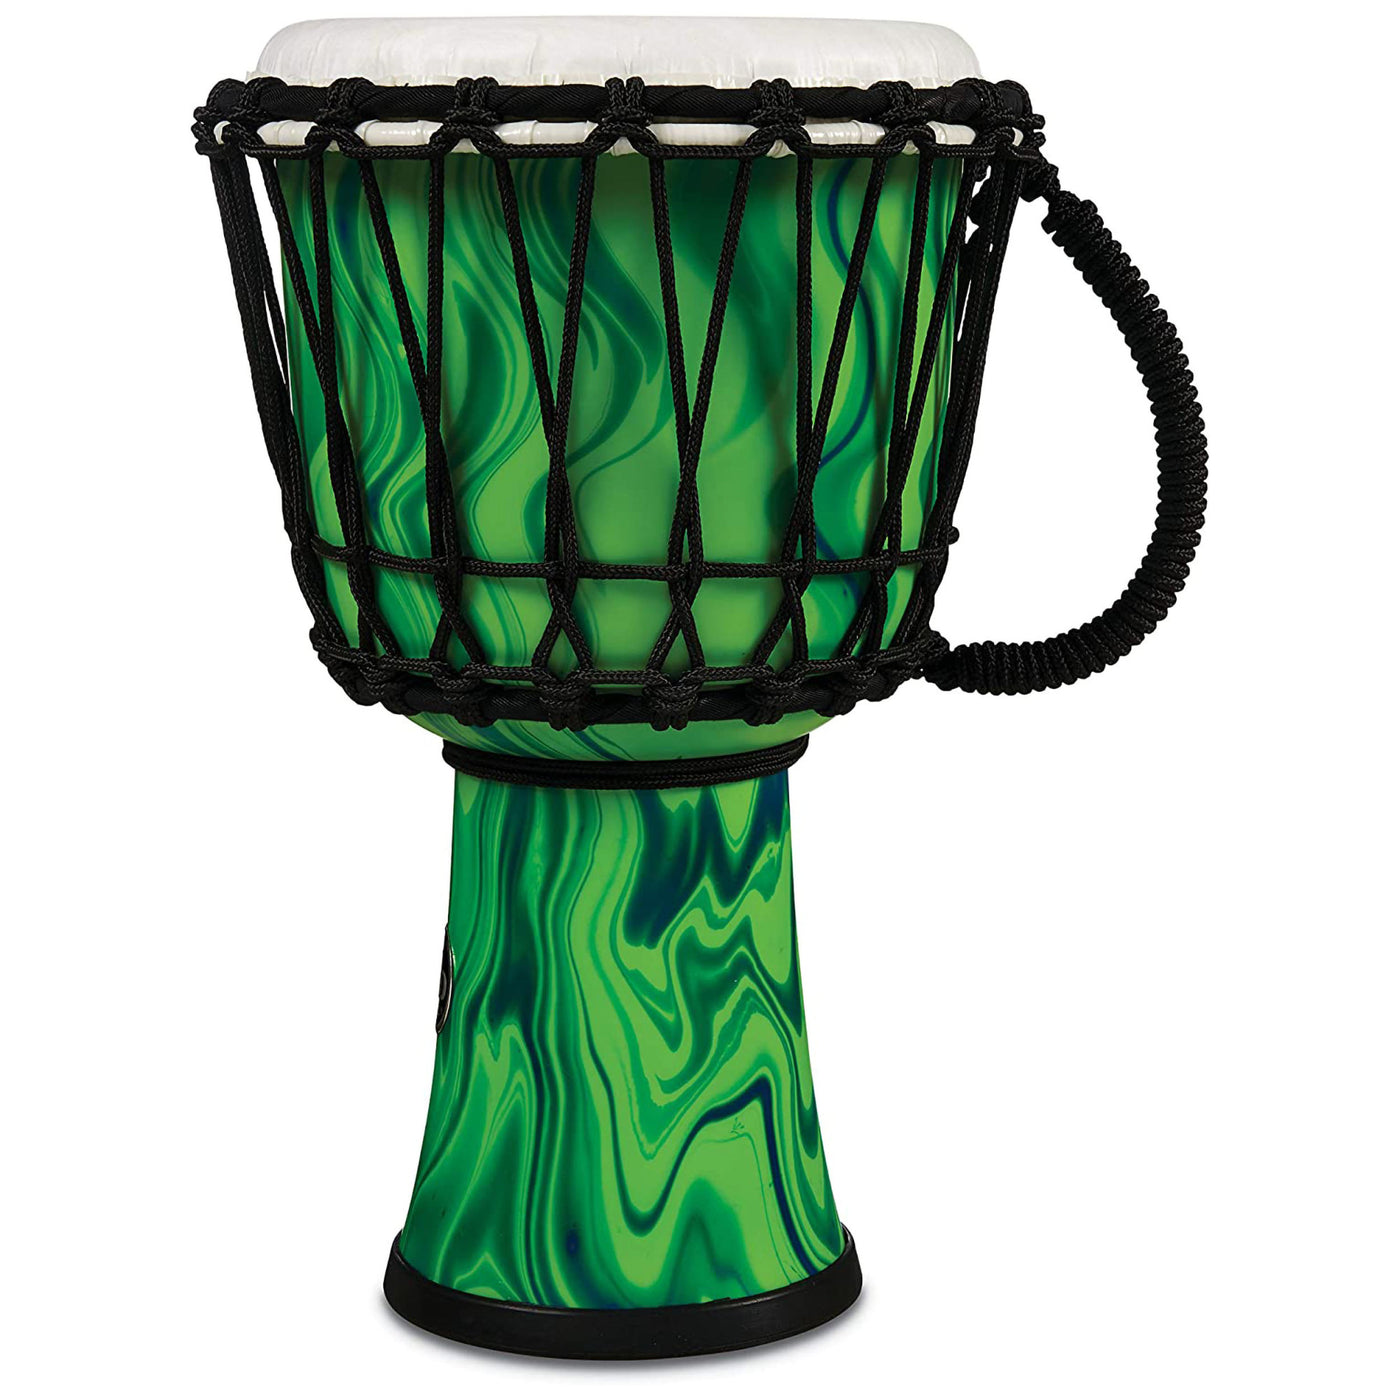 LP World Collection Rope Circle Djembe, 7", Green Marble